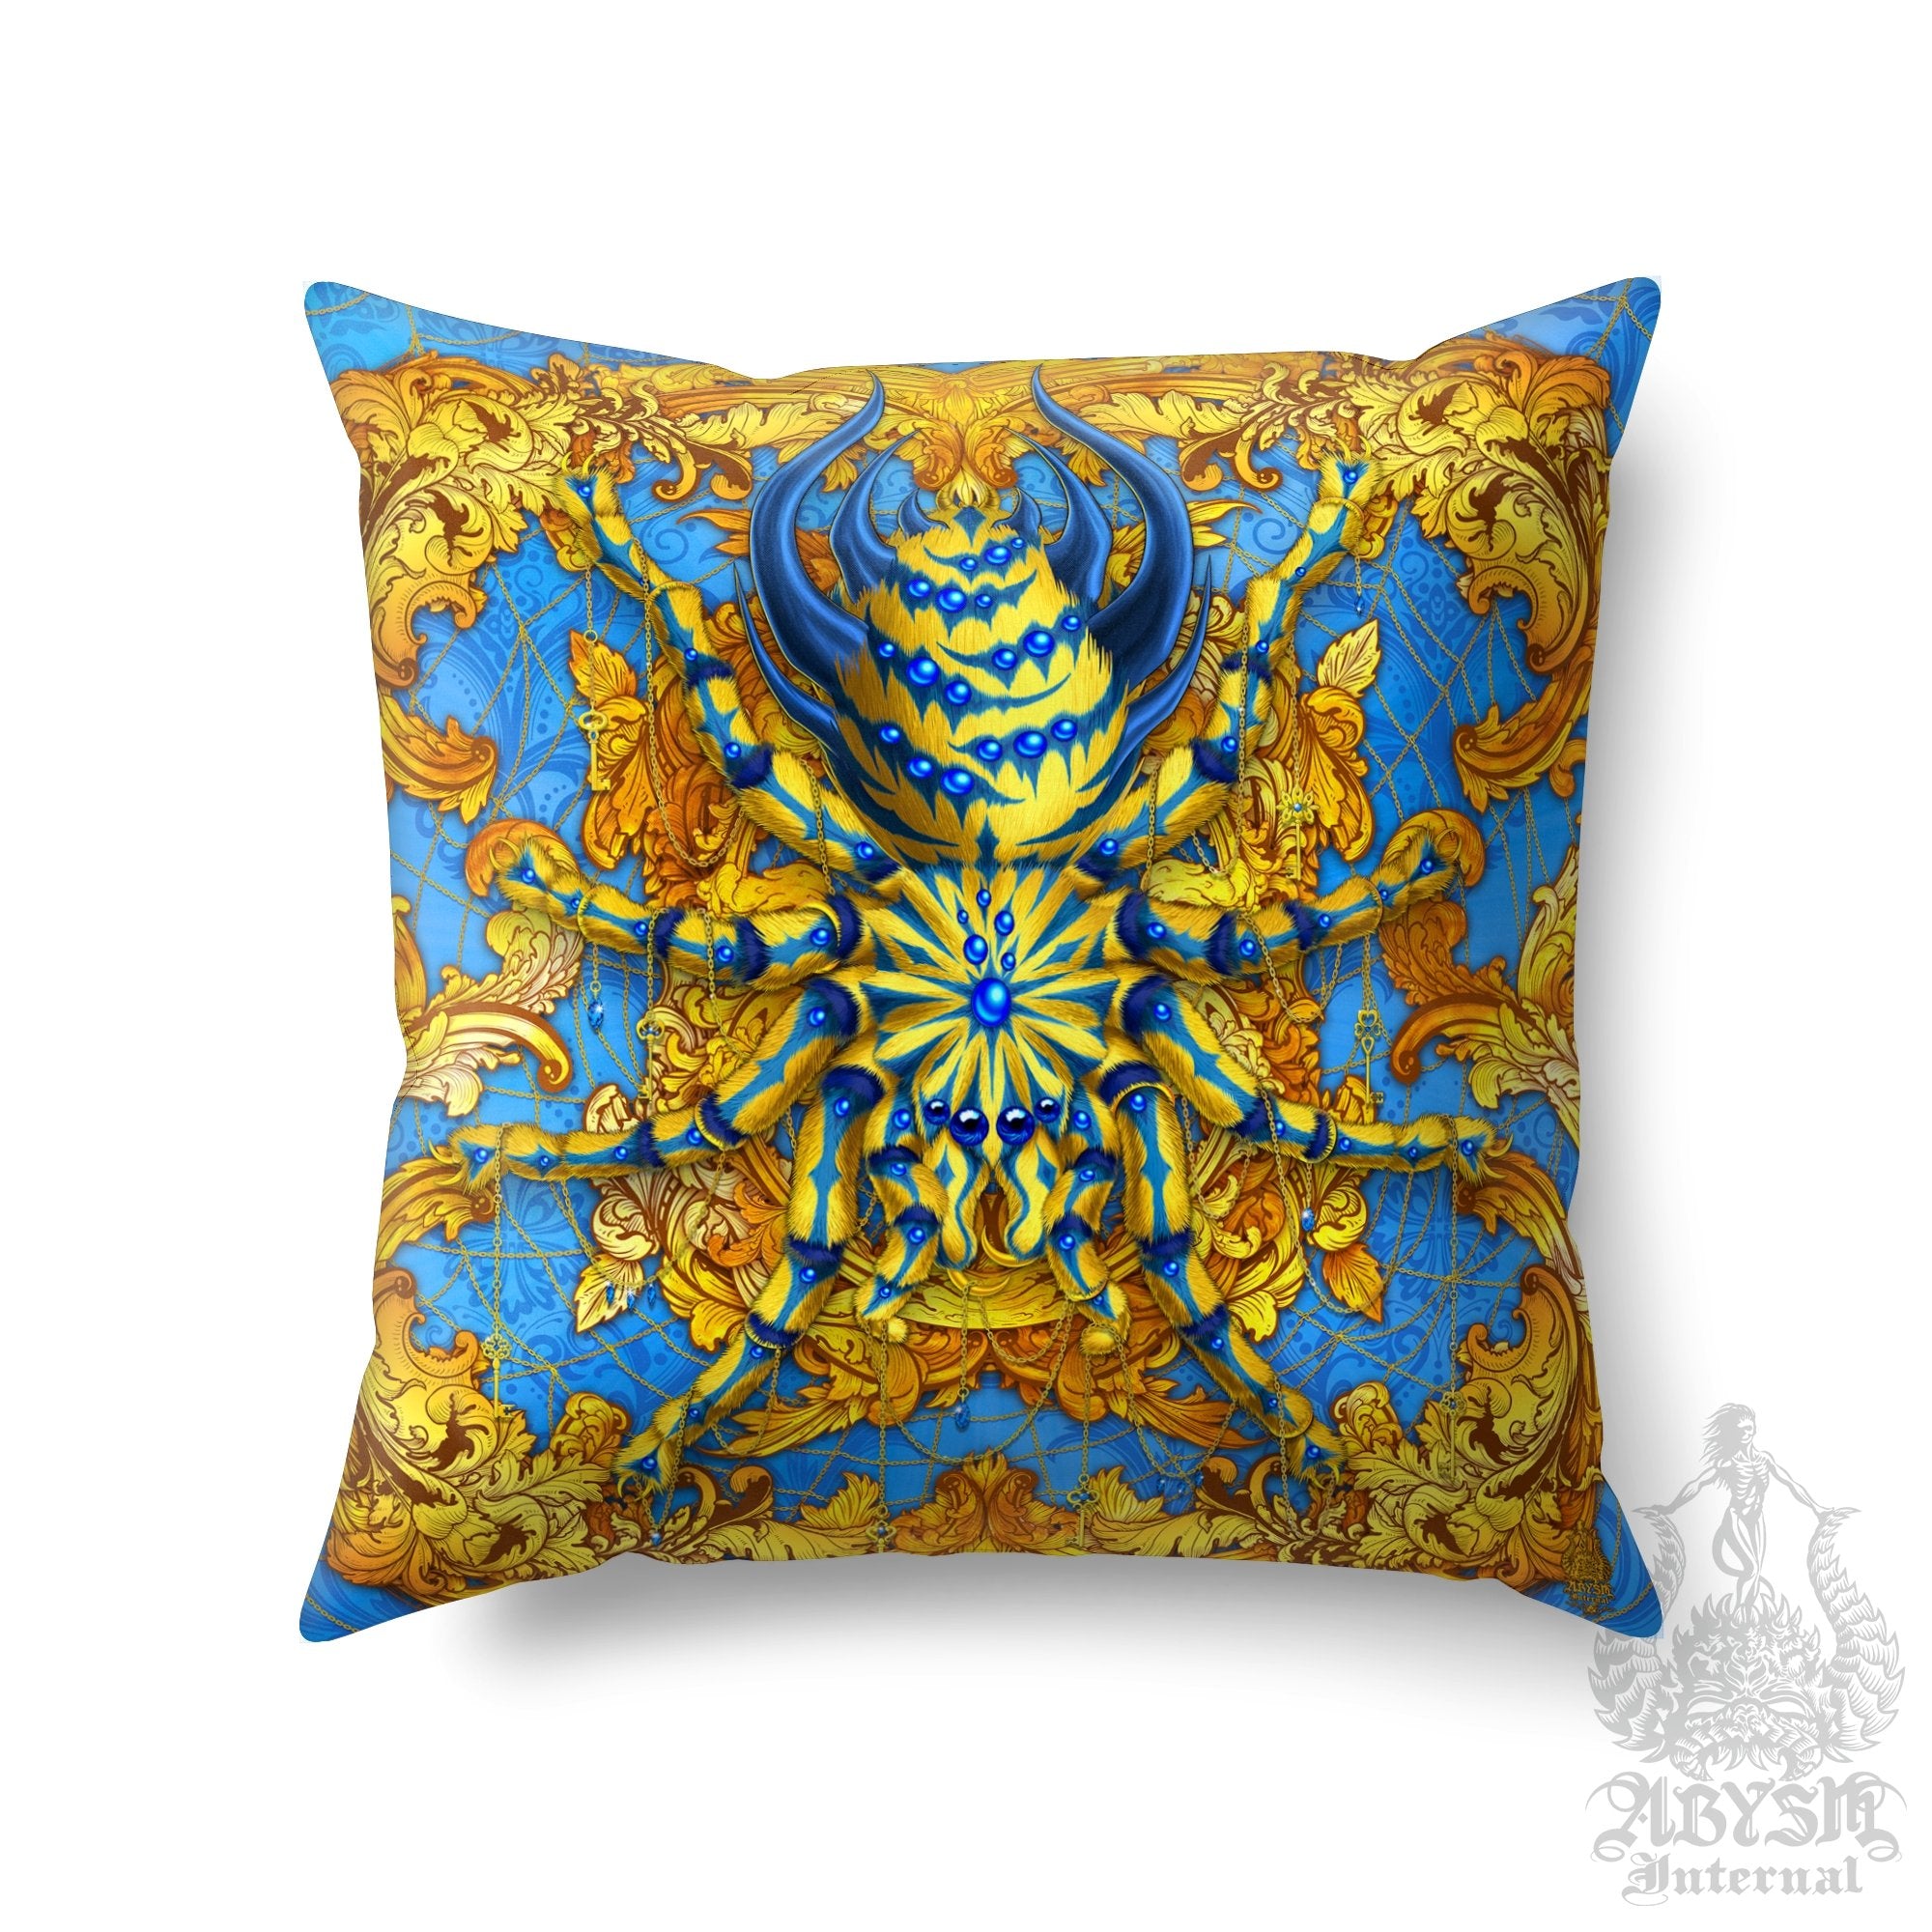 Spider Throw Pillow, Decorative Accent Cushion, Indie Room Decor, Funky and Eclectic Home - Tarantula, Gold and Cyan - Abysm Internal